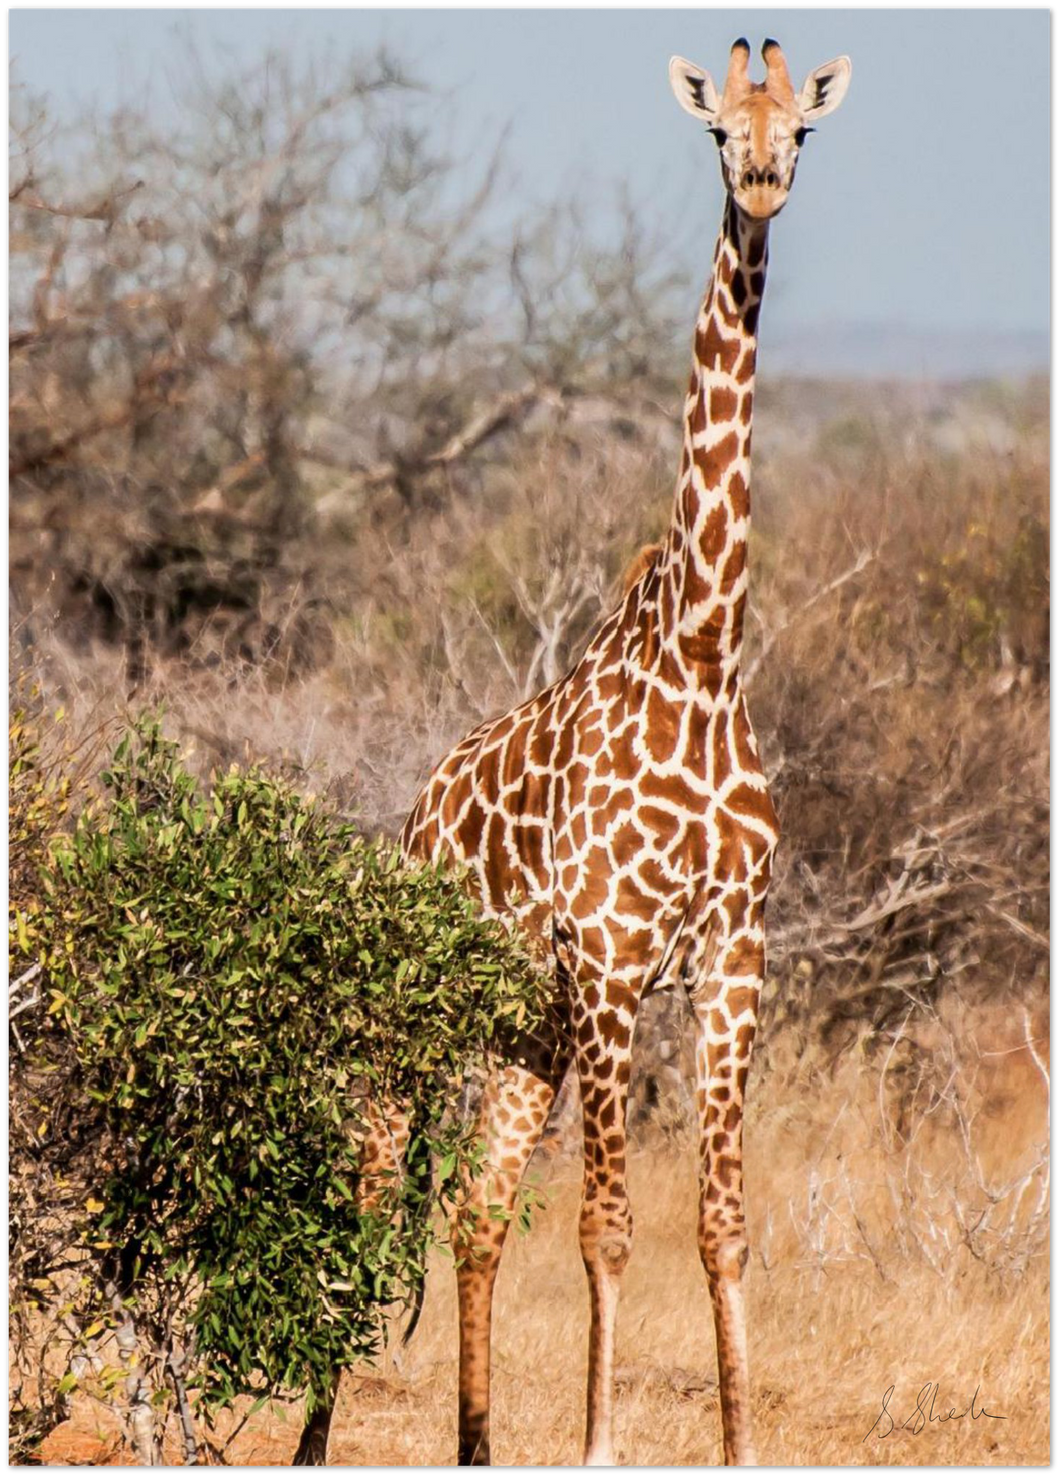 A poster of a Giraffe standing & facing the camera with the Karoo landscape.